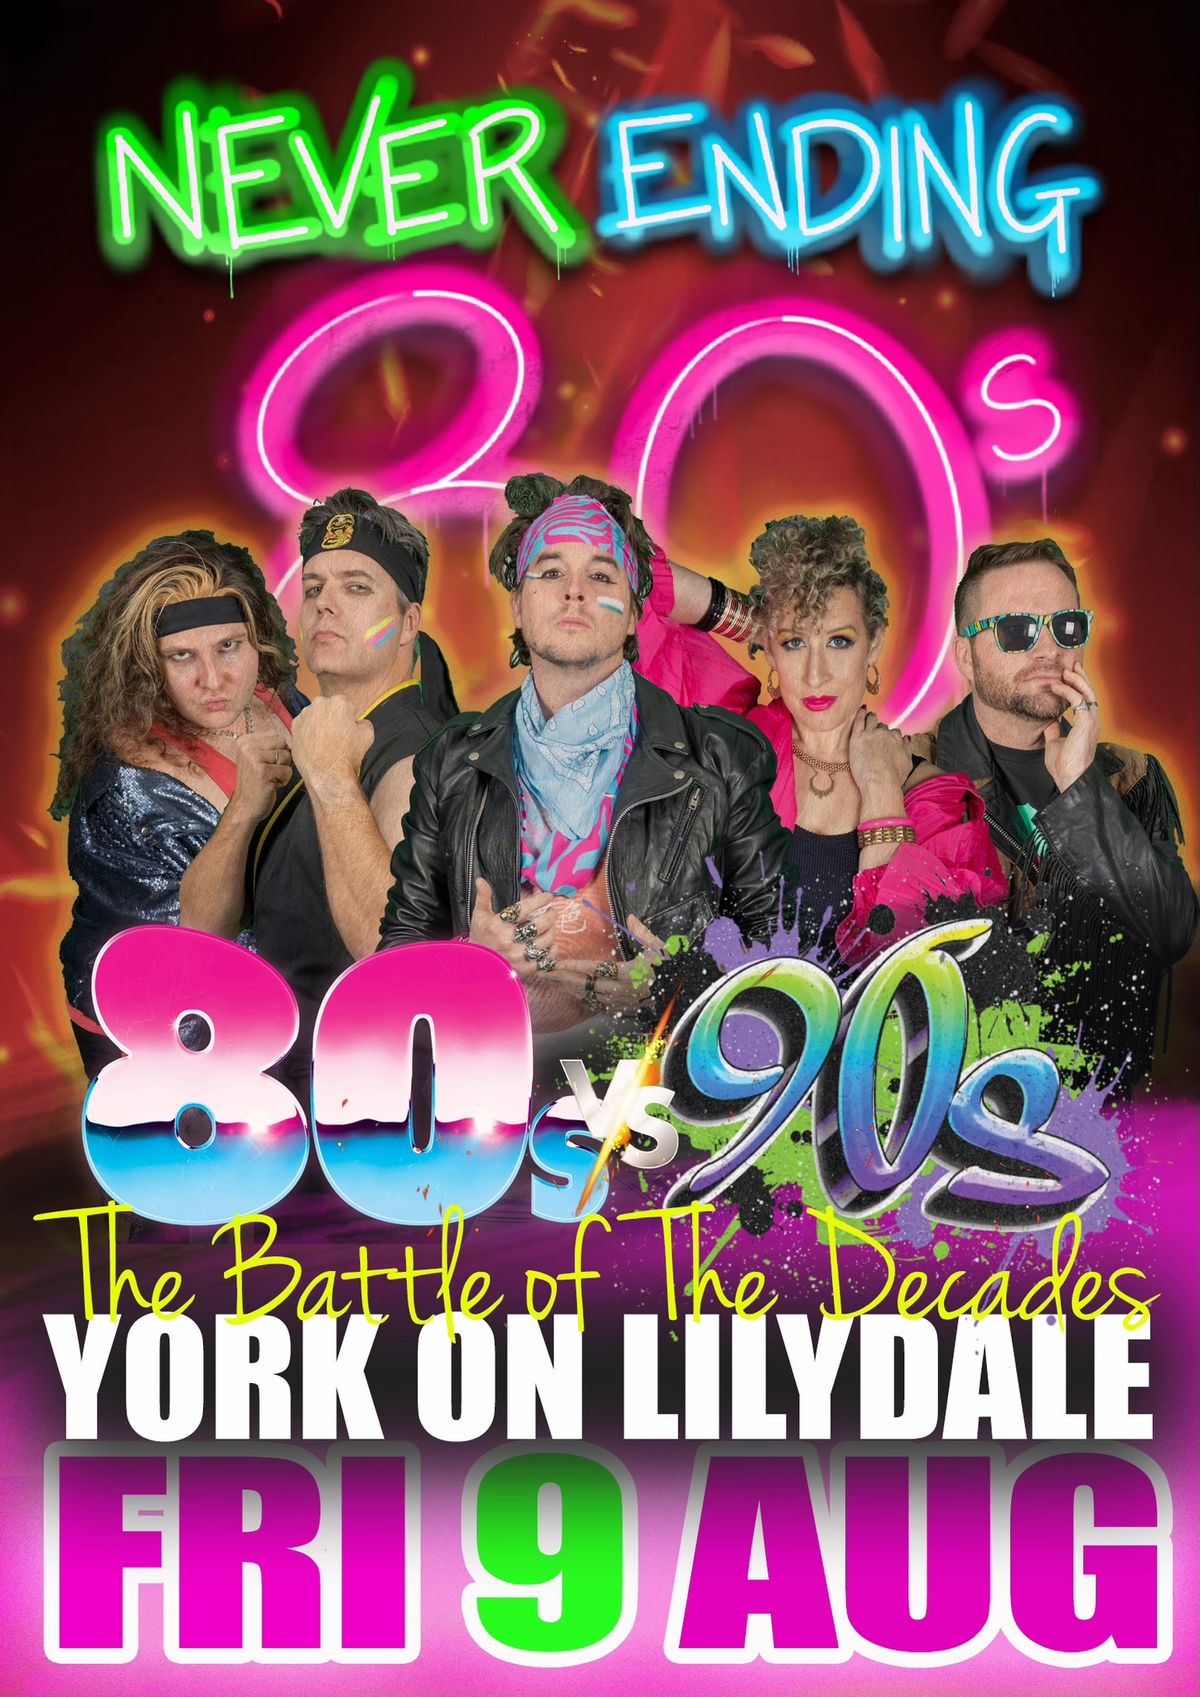 Never Ending 80s v 90s PARTY - York On Lilydale 